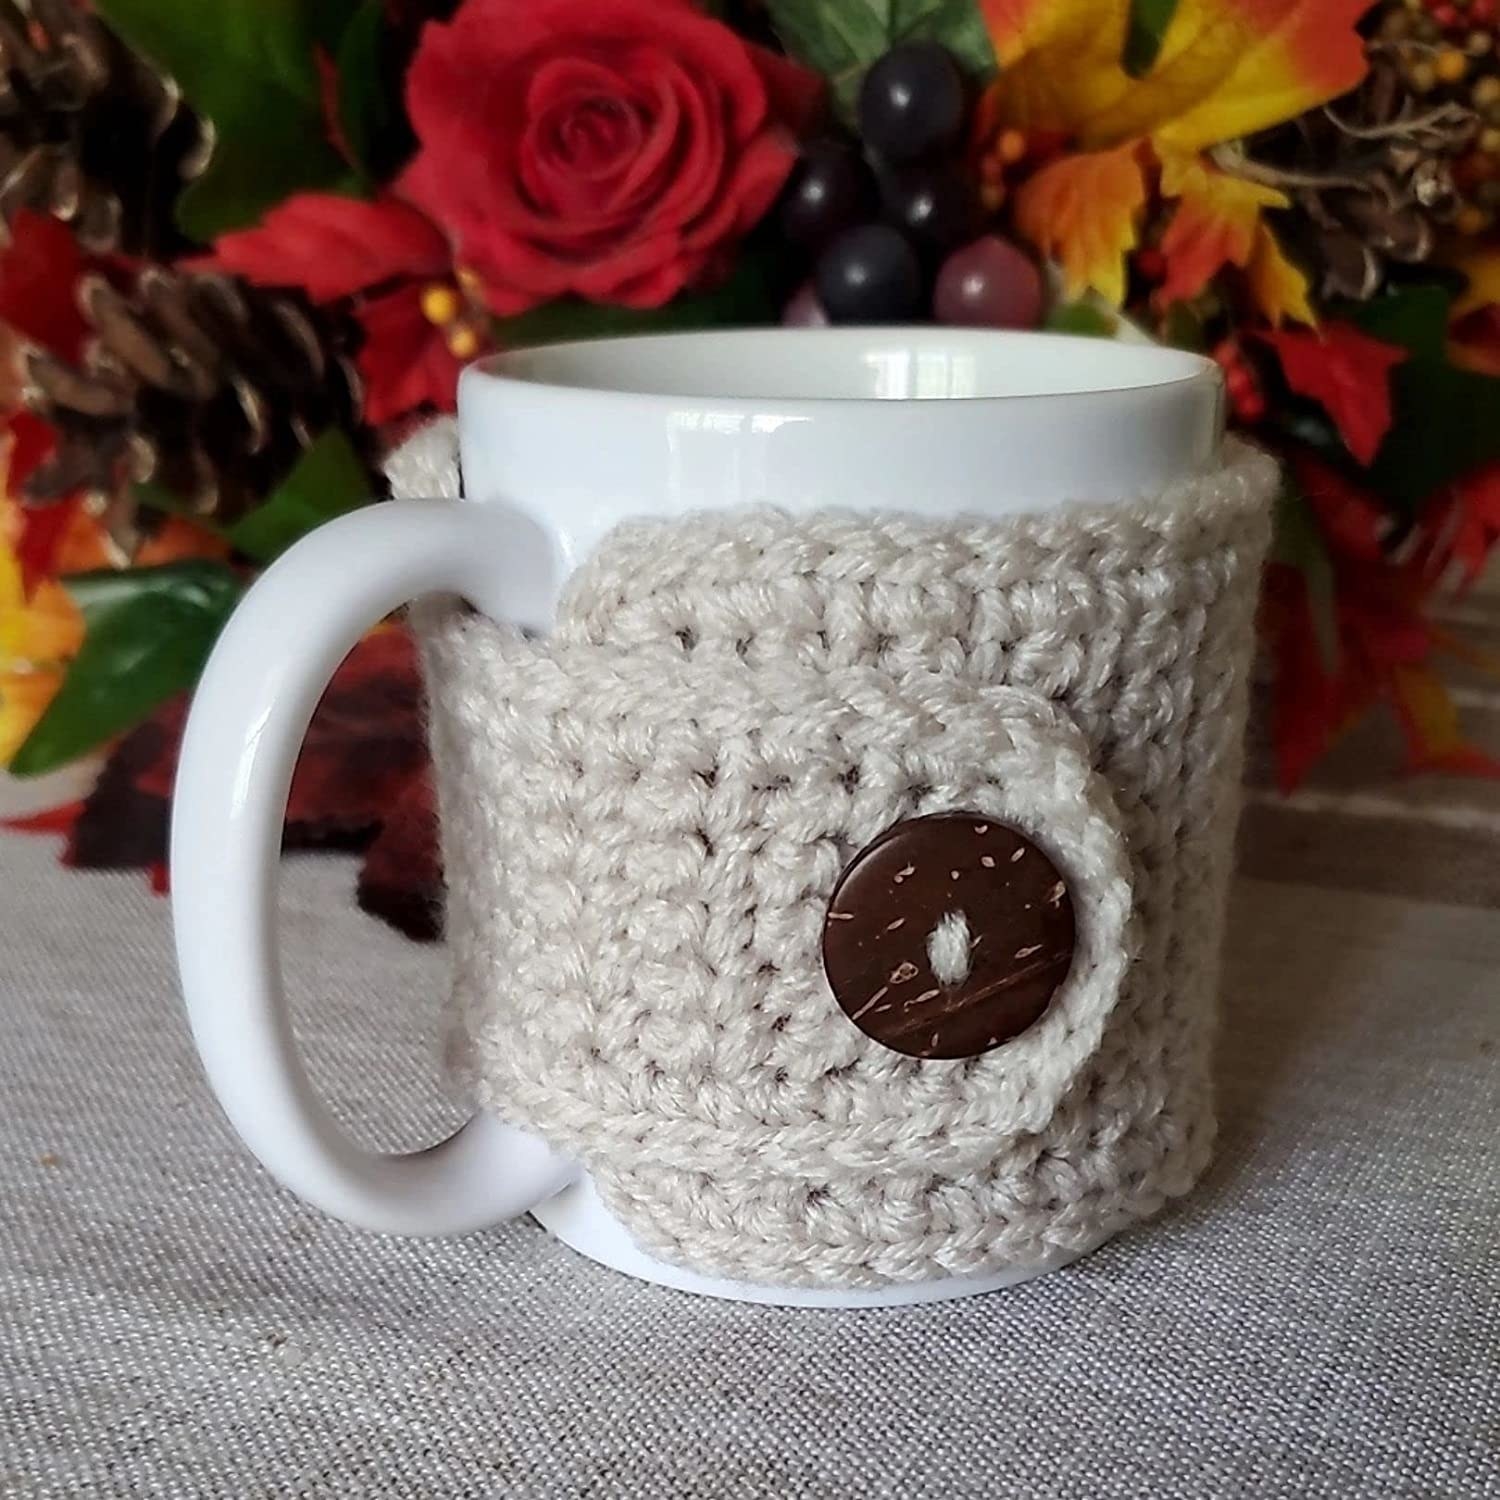 Home decor Present Cozy interior. Cozy knitted pink heating pad for the cup Mug sweater Cover for a mug Cozy things Cozy home